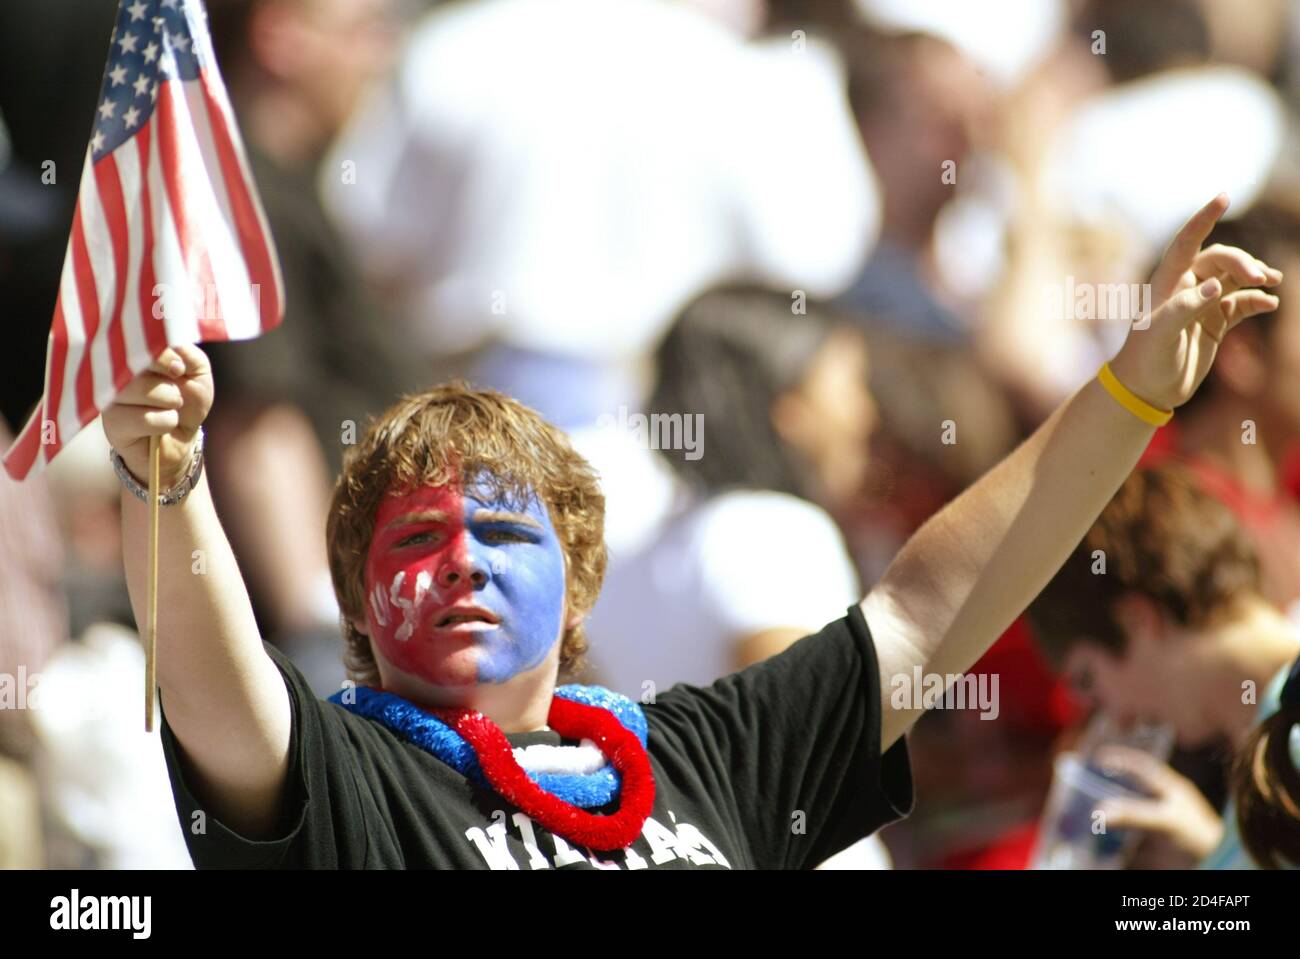 U.S. men's soccer team fan holds up an American flag after the U.S. beat the Canada in their Gold Cup match in Seattle.  U.S. men's soccer team fan,14-year-old Nick Bleich of Puyallup, Washington, holds up an American flag in celebration after the U.S. team beat Canada 2-0 in their Confederation of North, Central American and Caribbean Association Football (CONCACAF) Gold Cup soccer match at Qwest Field in Seattle, Washington, July 9, 2005. REUTERS/Anthony P. Bolante Stock Photo